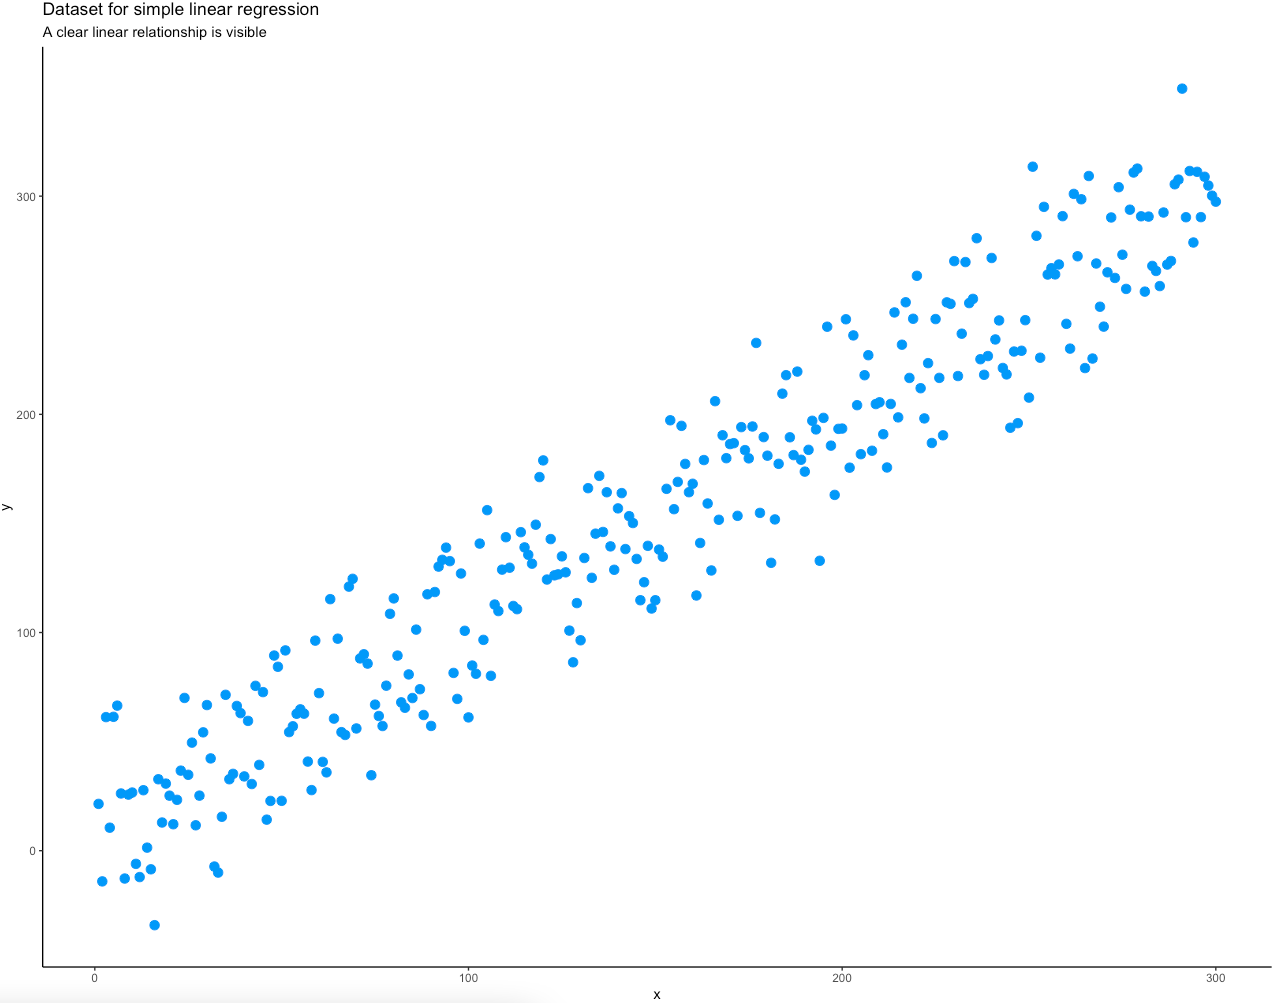 Image 4 - Input data as a scatter plot